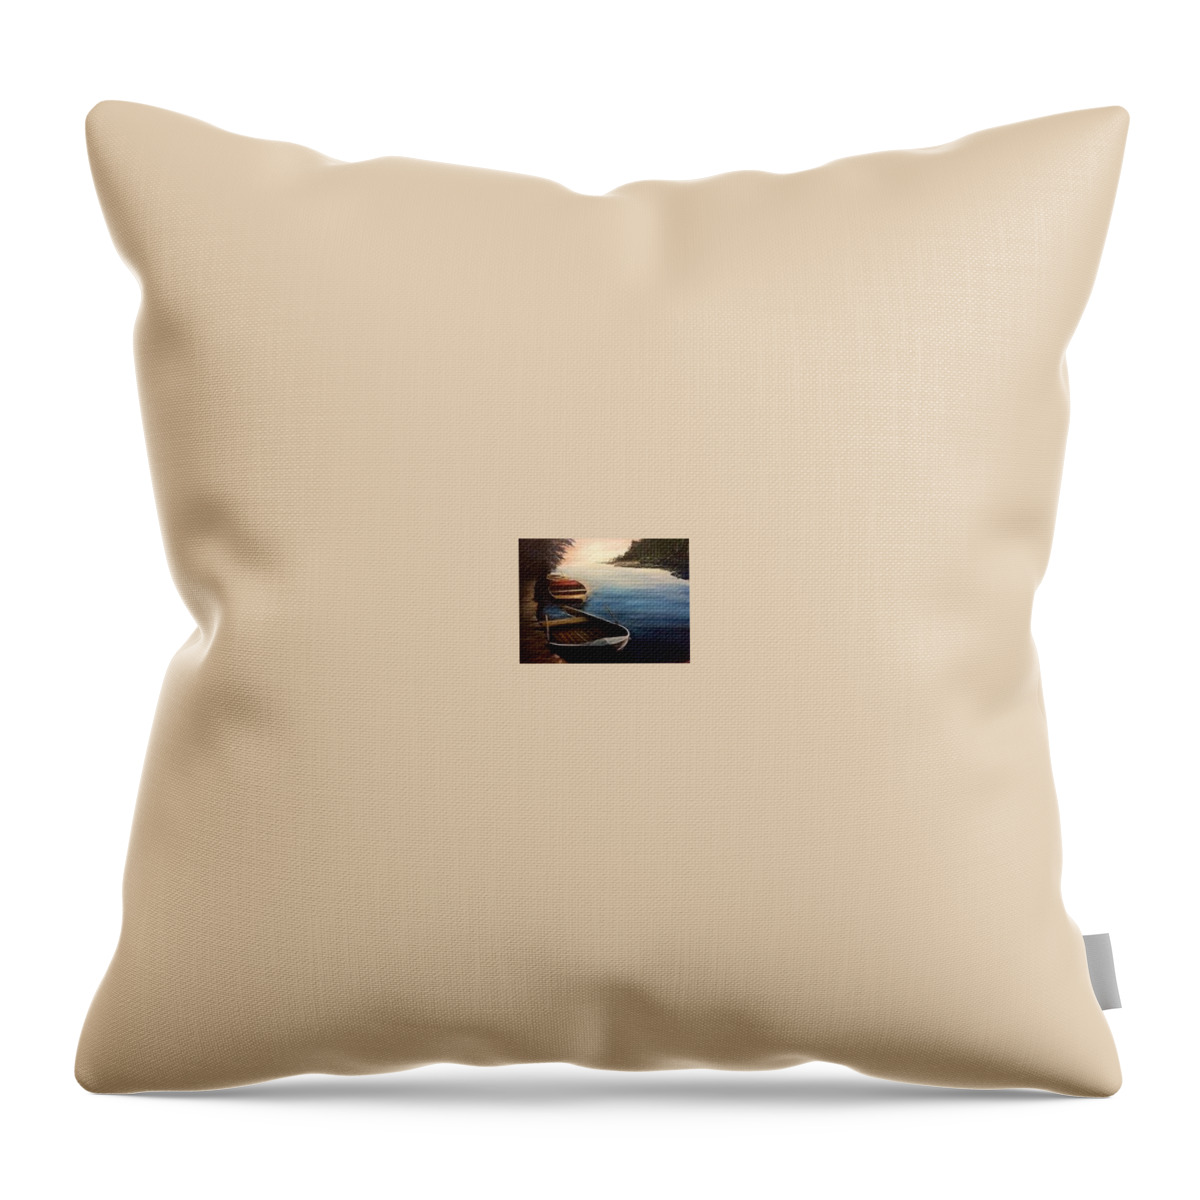 This Is A River/lake Boat Scene Throw Pillow featuring the painting No row by Joe Bracco